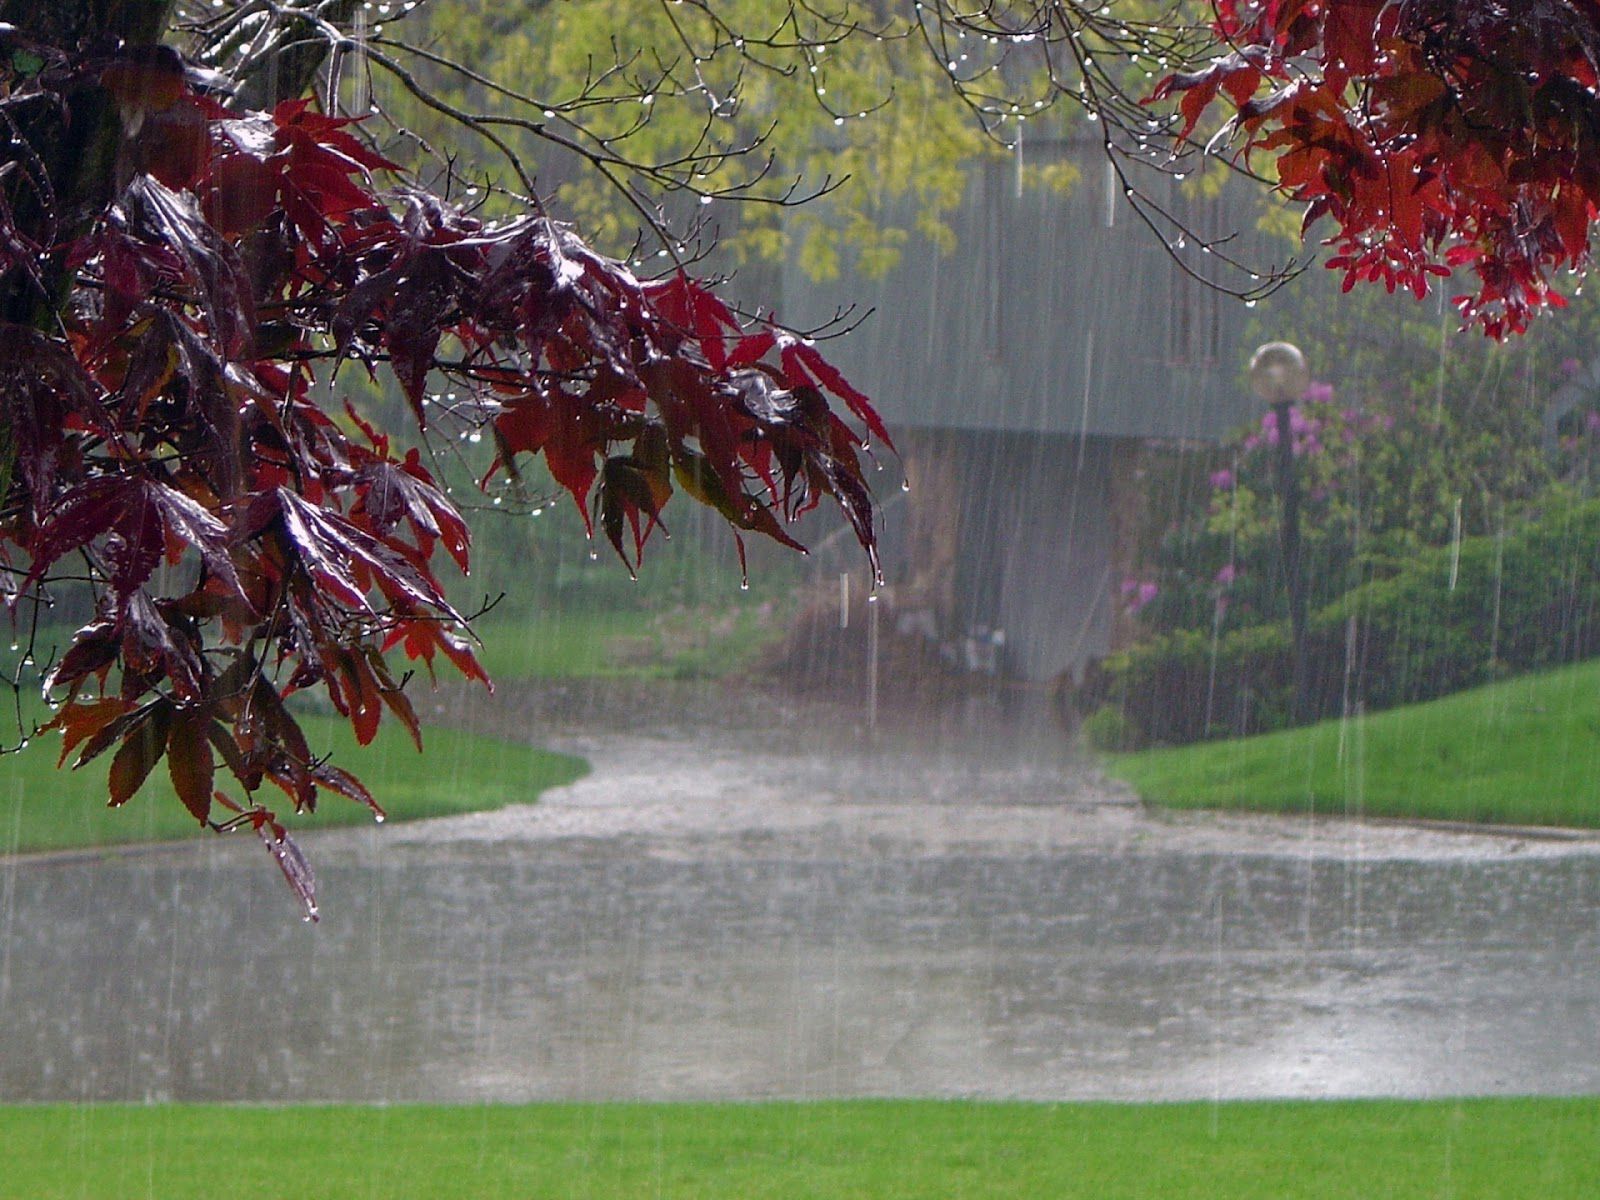 Rainy Day Images Free Download - 1600x1200 Wallpaper 